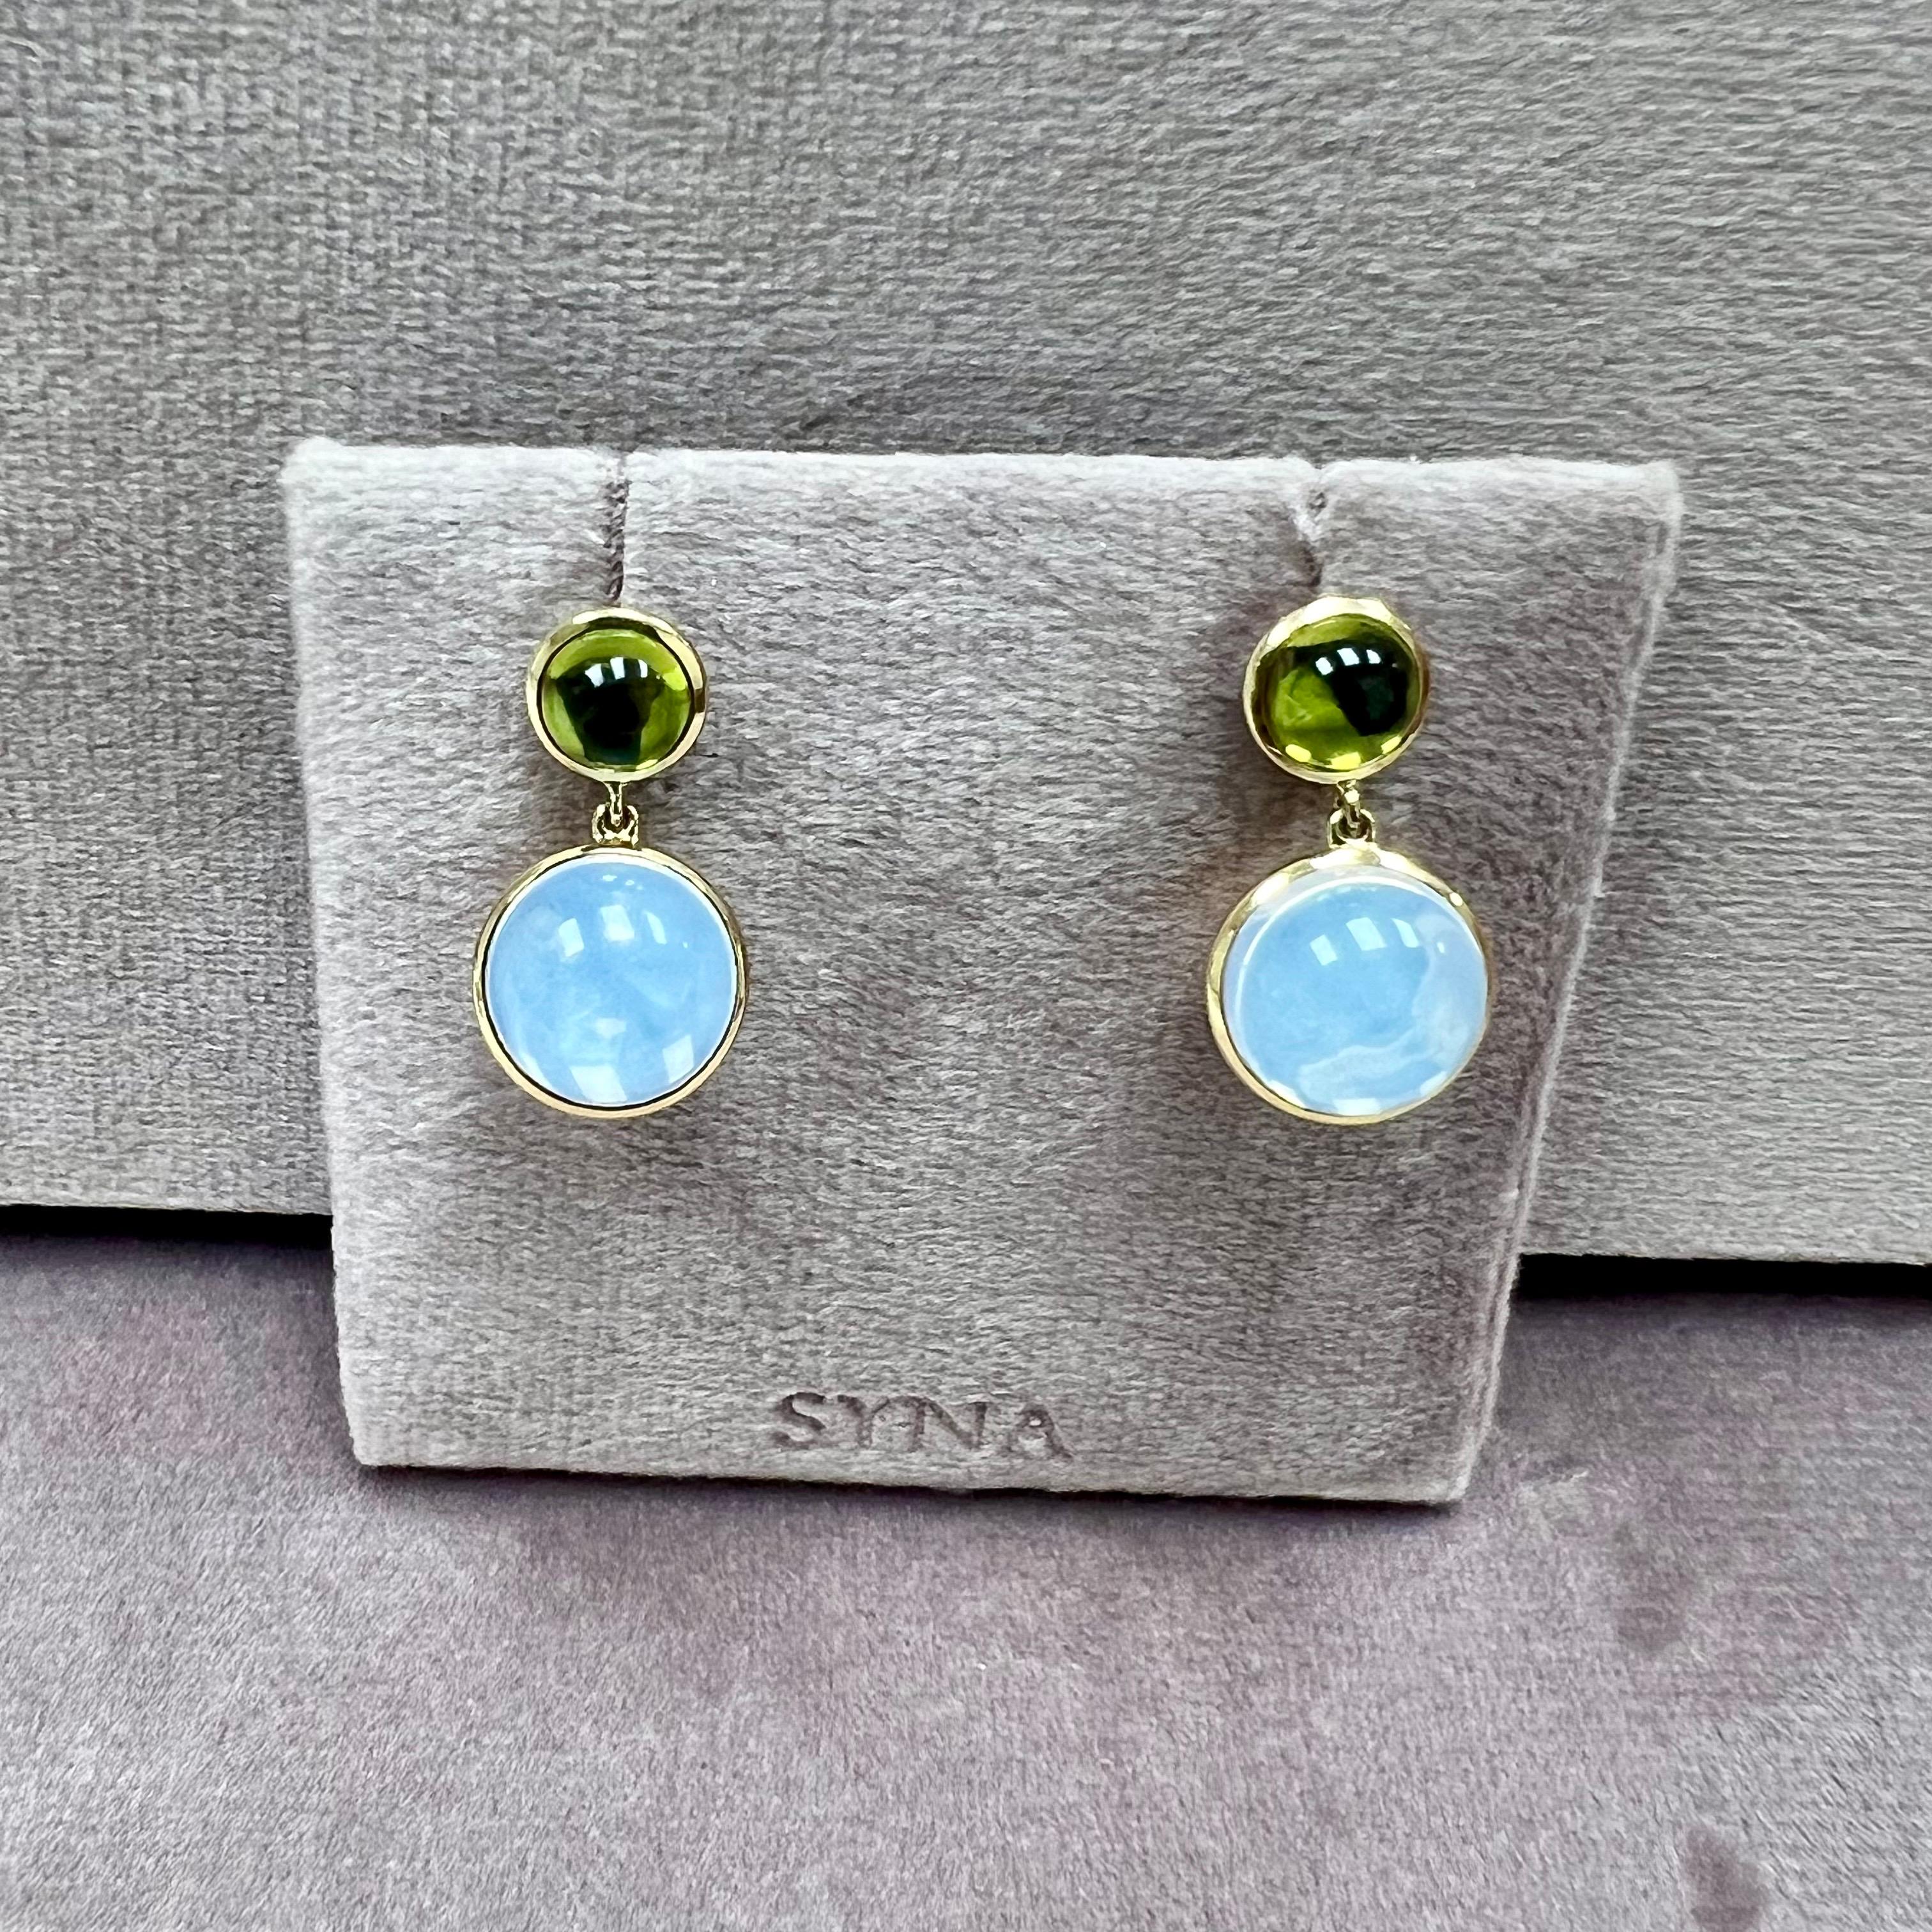 Created in 18 karat yellow gold
Moon quartz 11 carats approx.
Peridot 2.50 carat approx.
Post back for pierced ears
Limited Edition

Crafted from 18 karat yellow gold, these limited-edition earrings feature 11 carats of moon quartz and 2.5 carats of